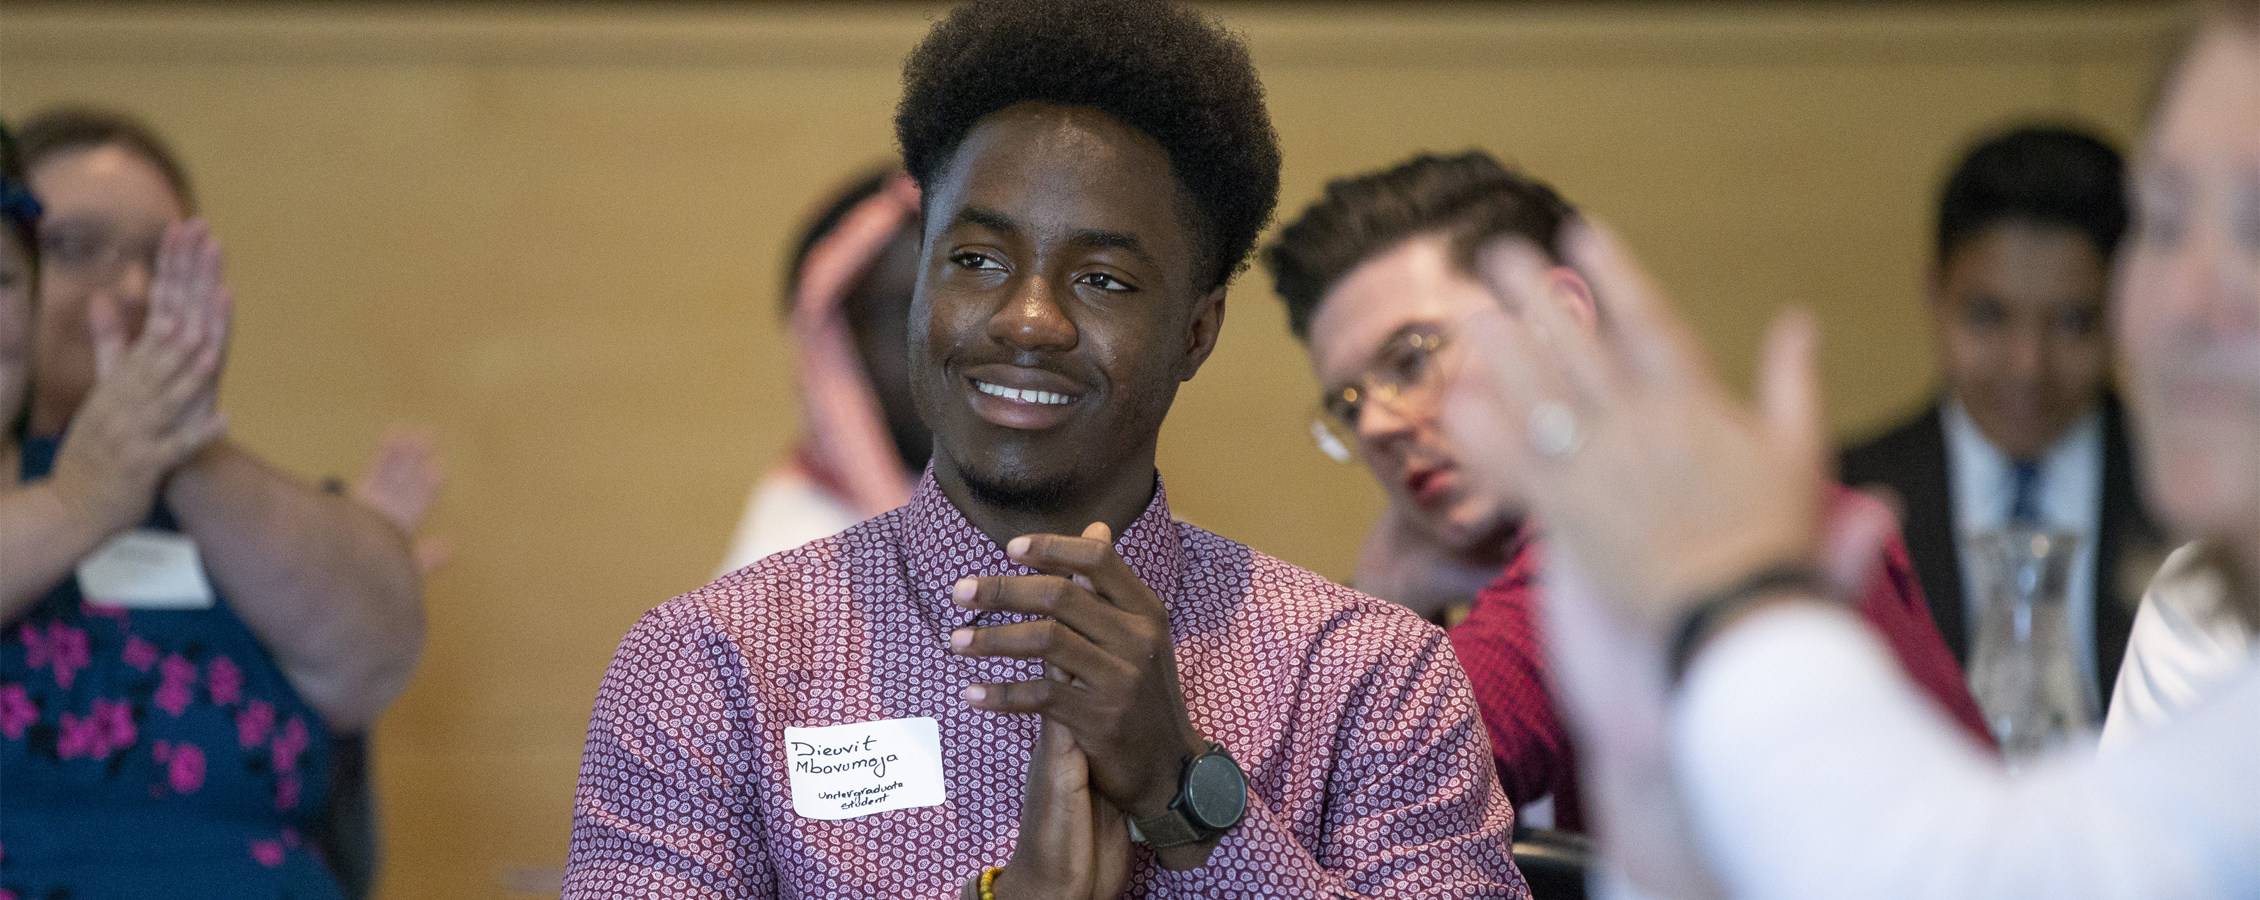 An international student claps during a campus event.